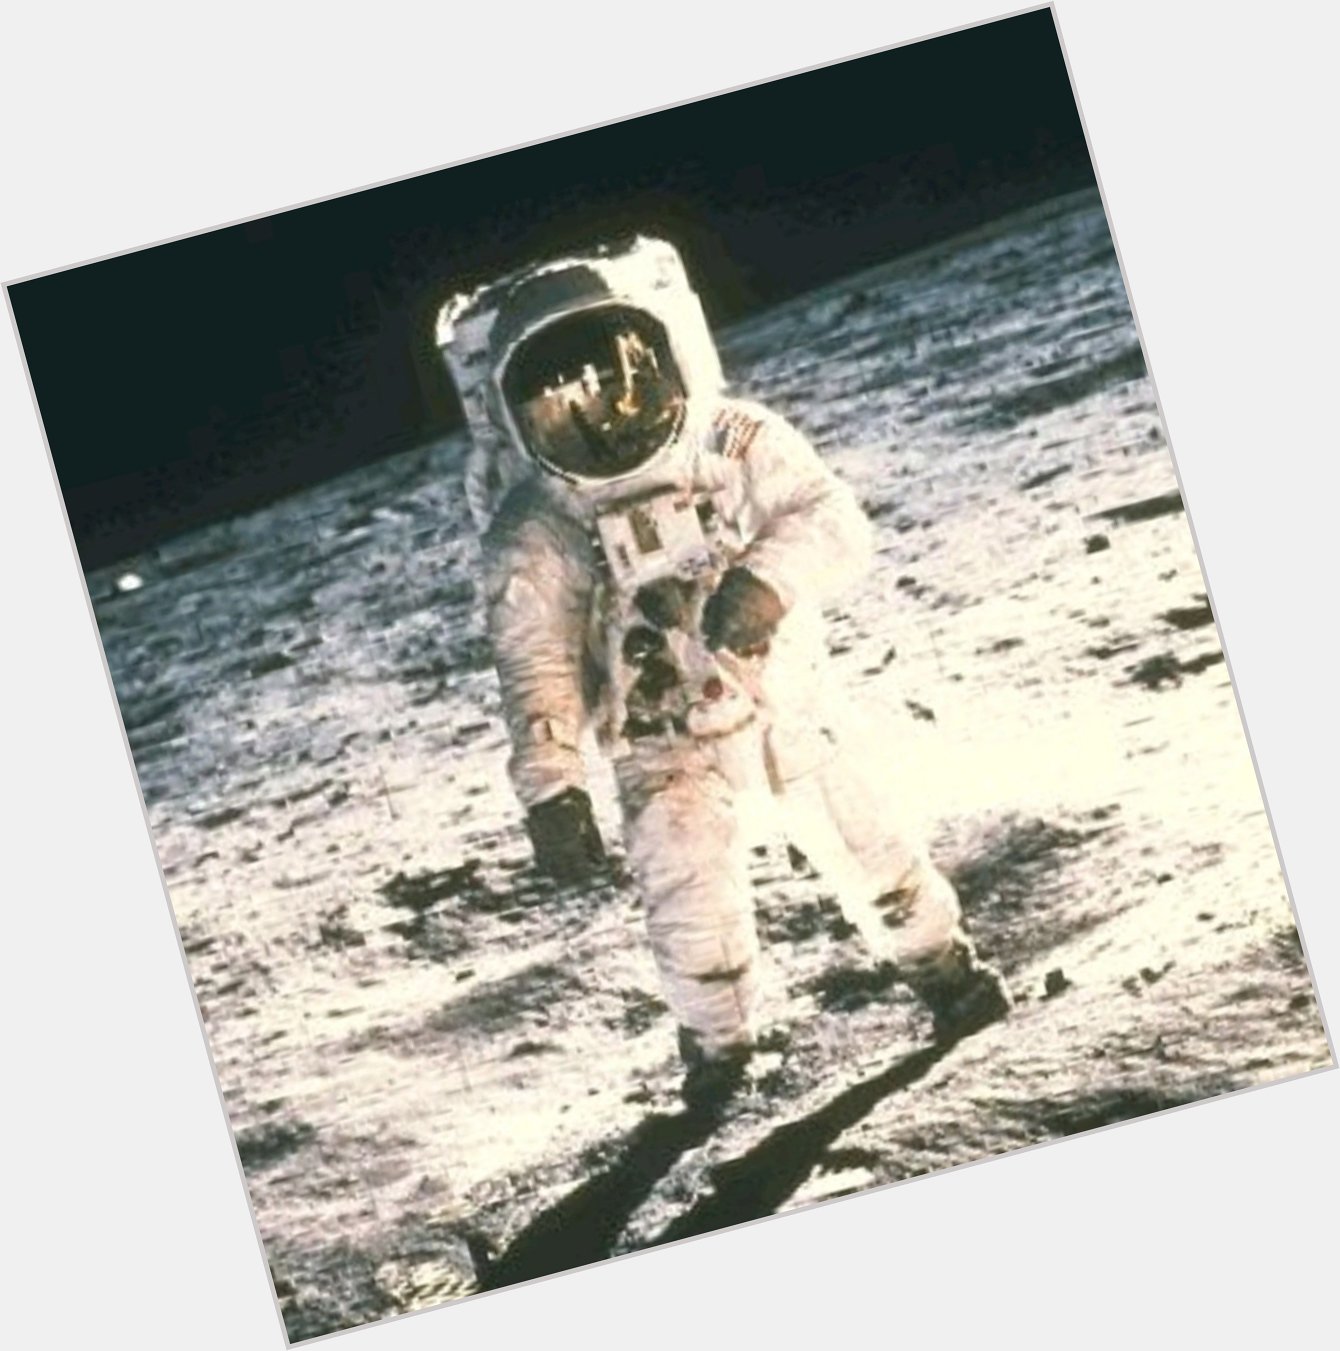 Happy birthday to Neil Armstrong, it would\ve been his 91st birthday! 